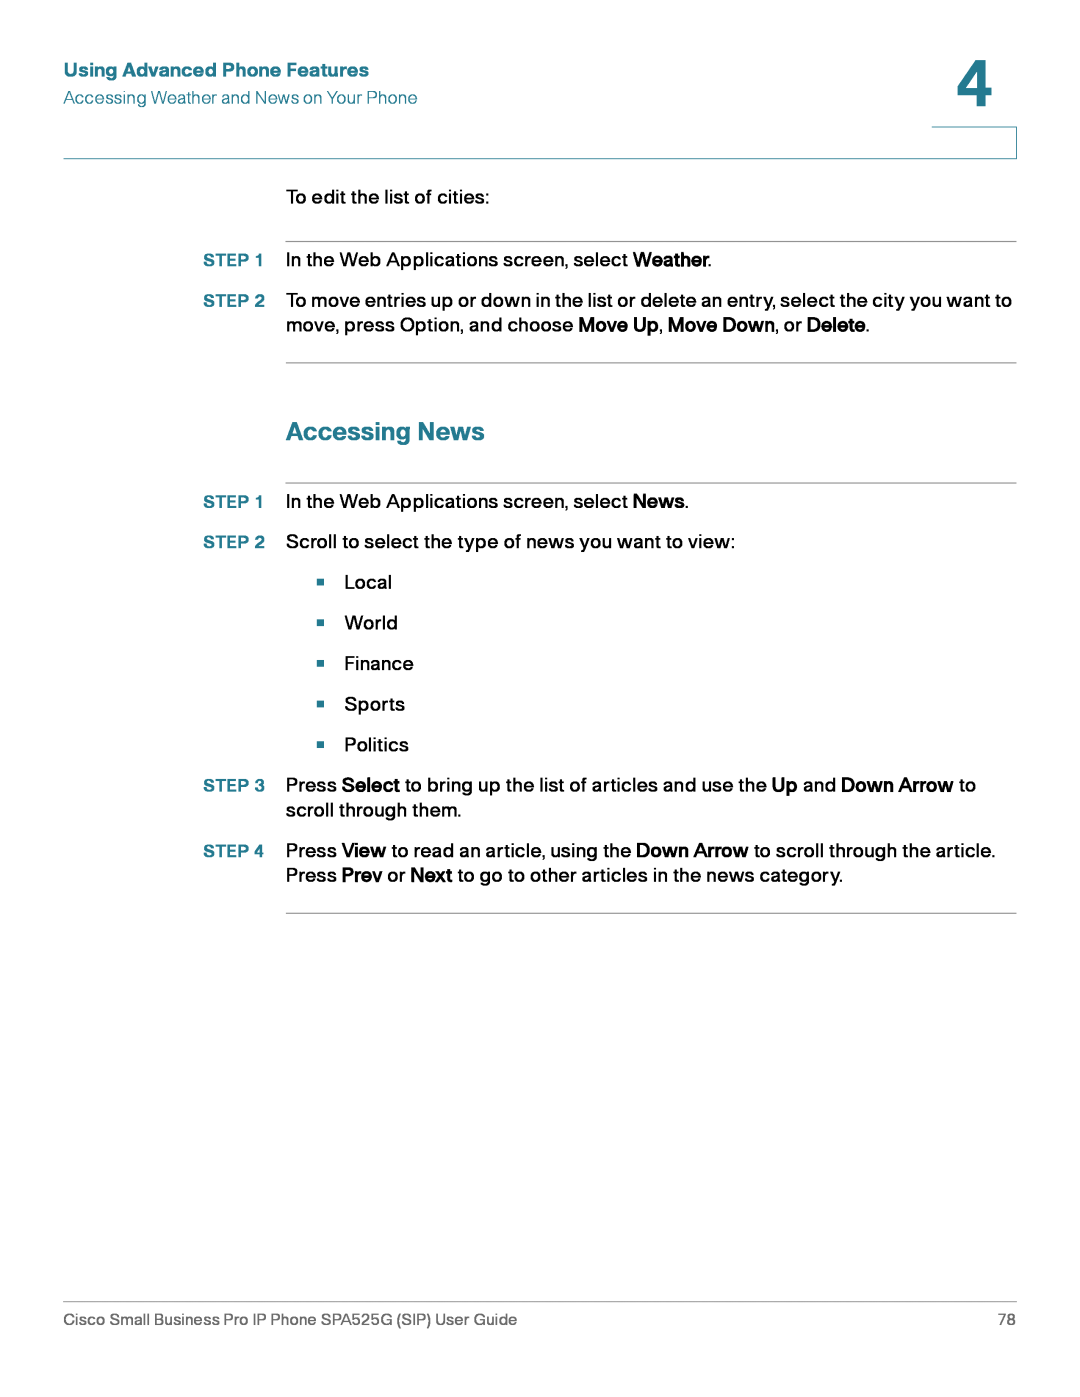 Cisco Systems SPA525G manual Accessing News, Using Advanced Phone Features 